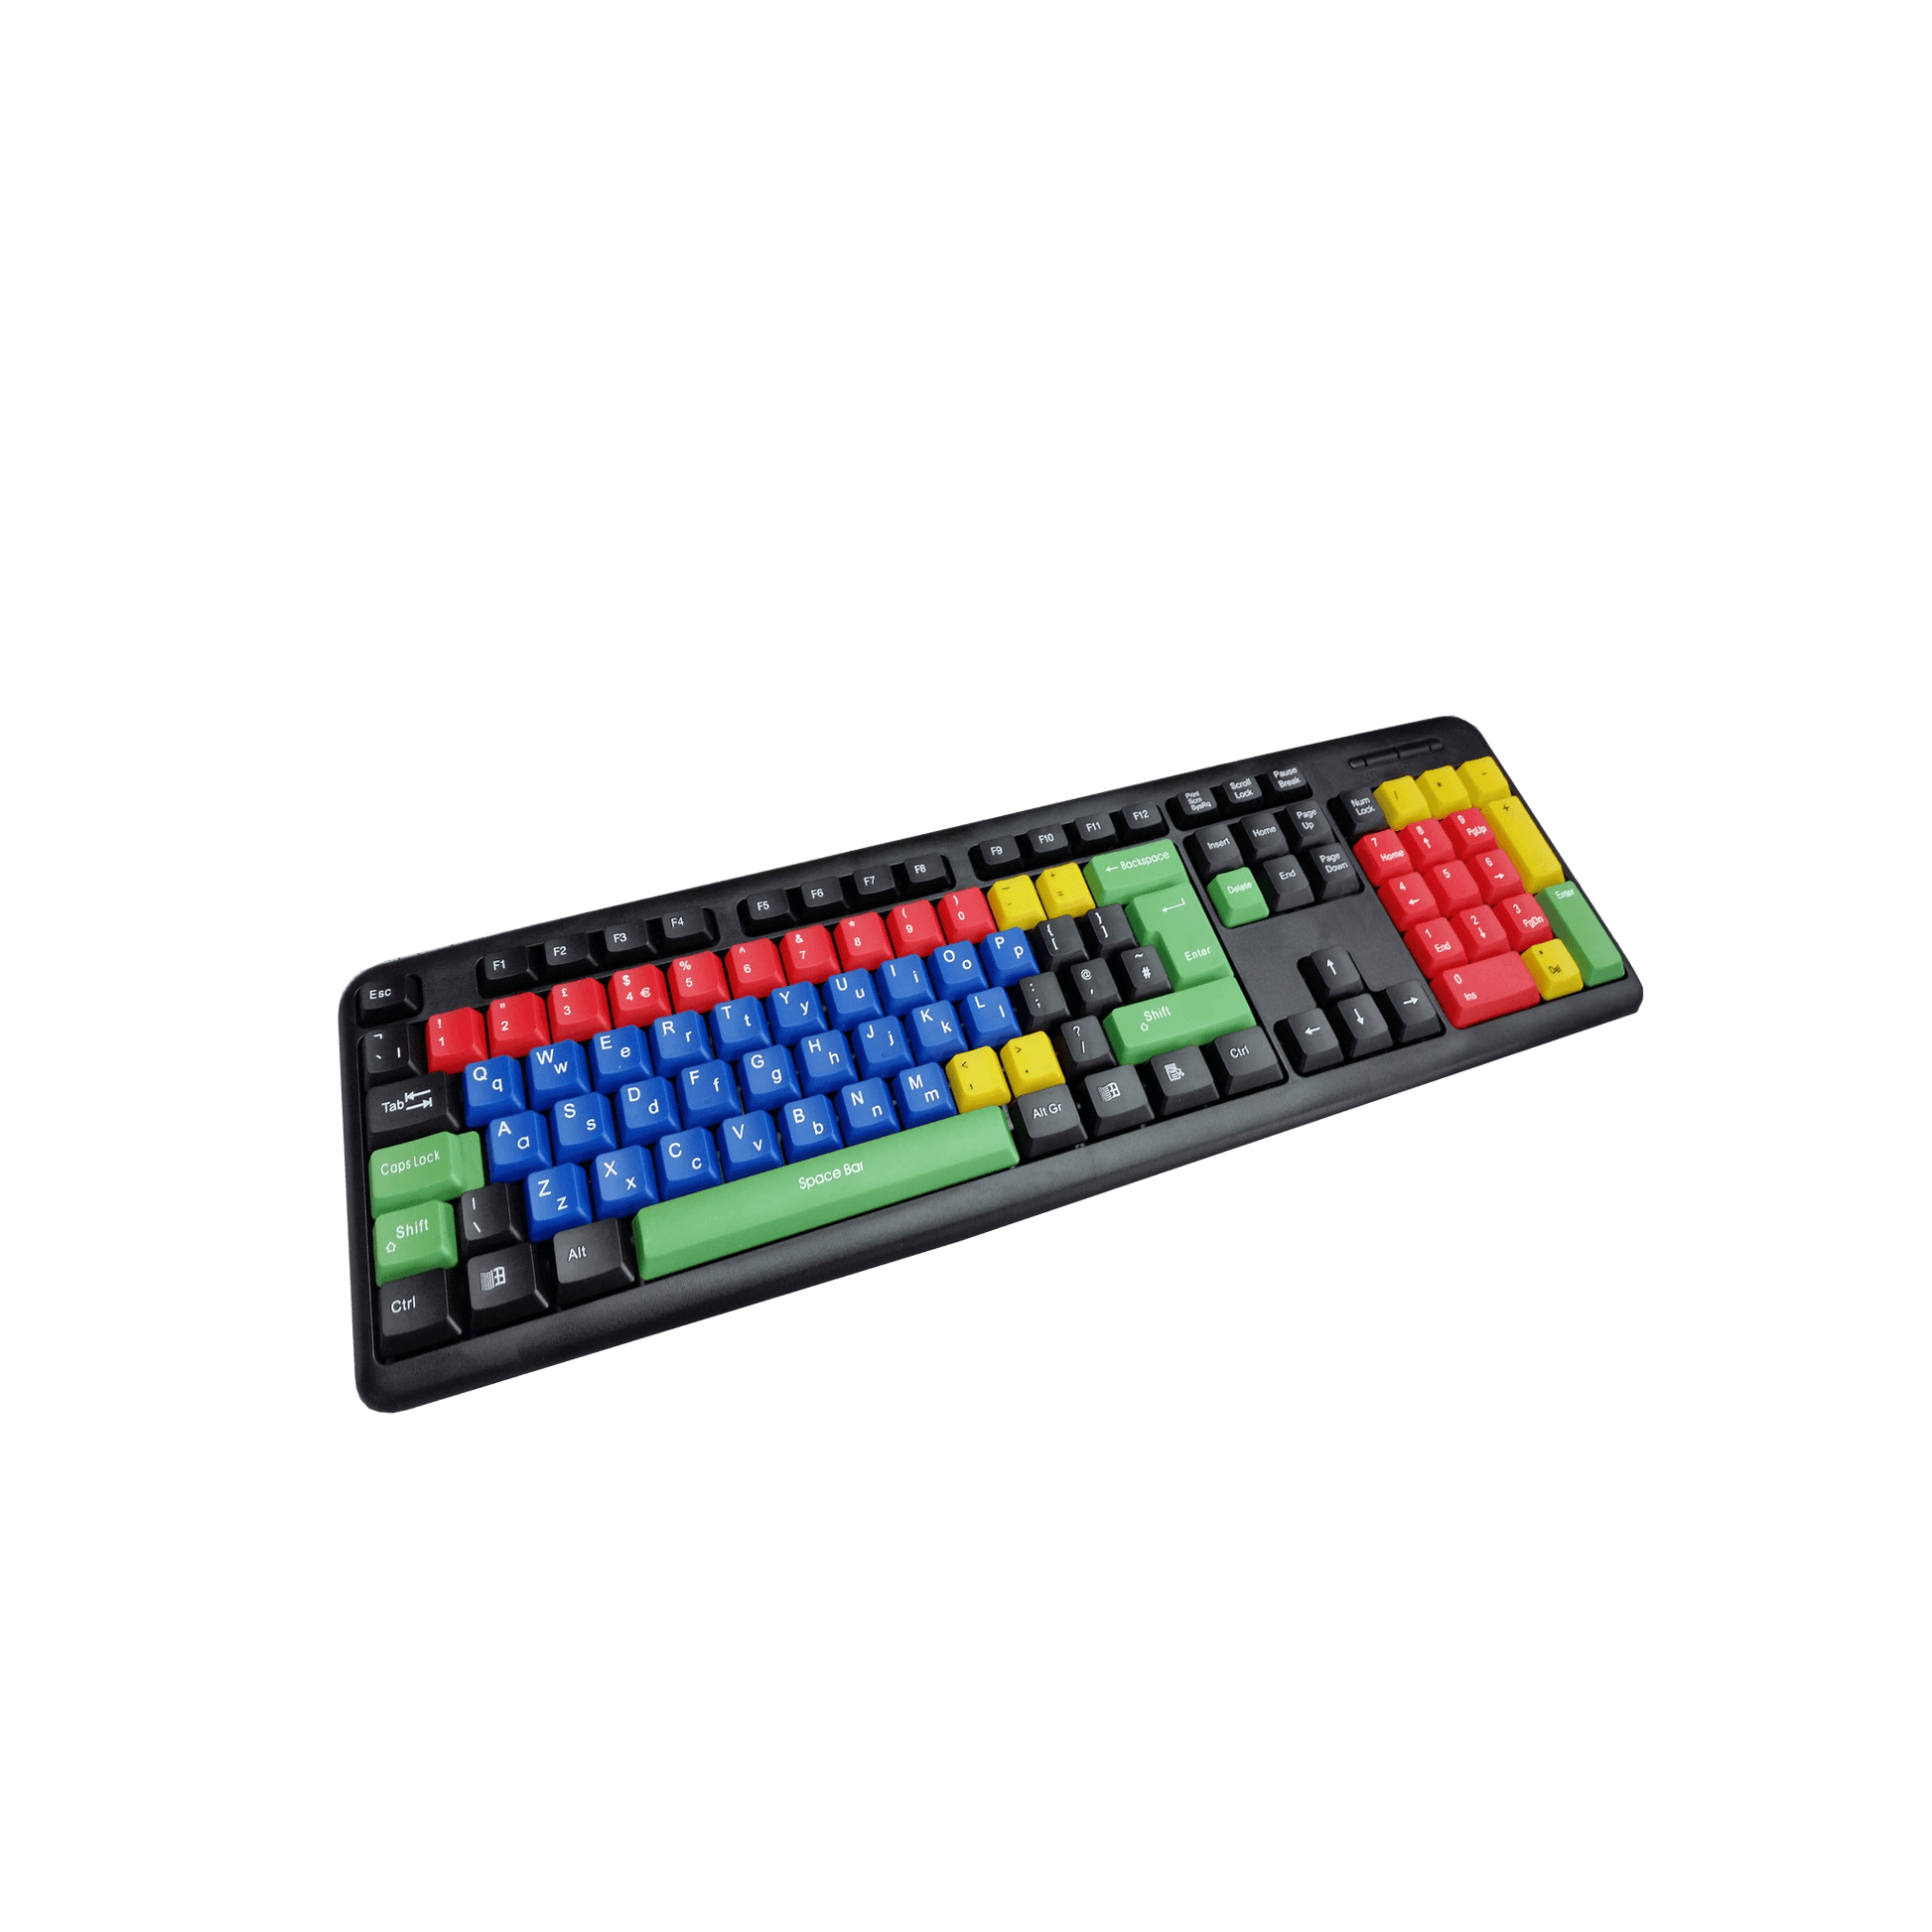 Lower and Uppercase Keyboard with coloured keys